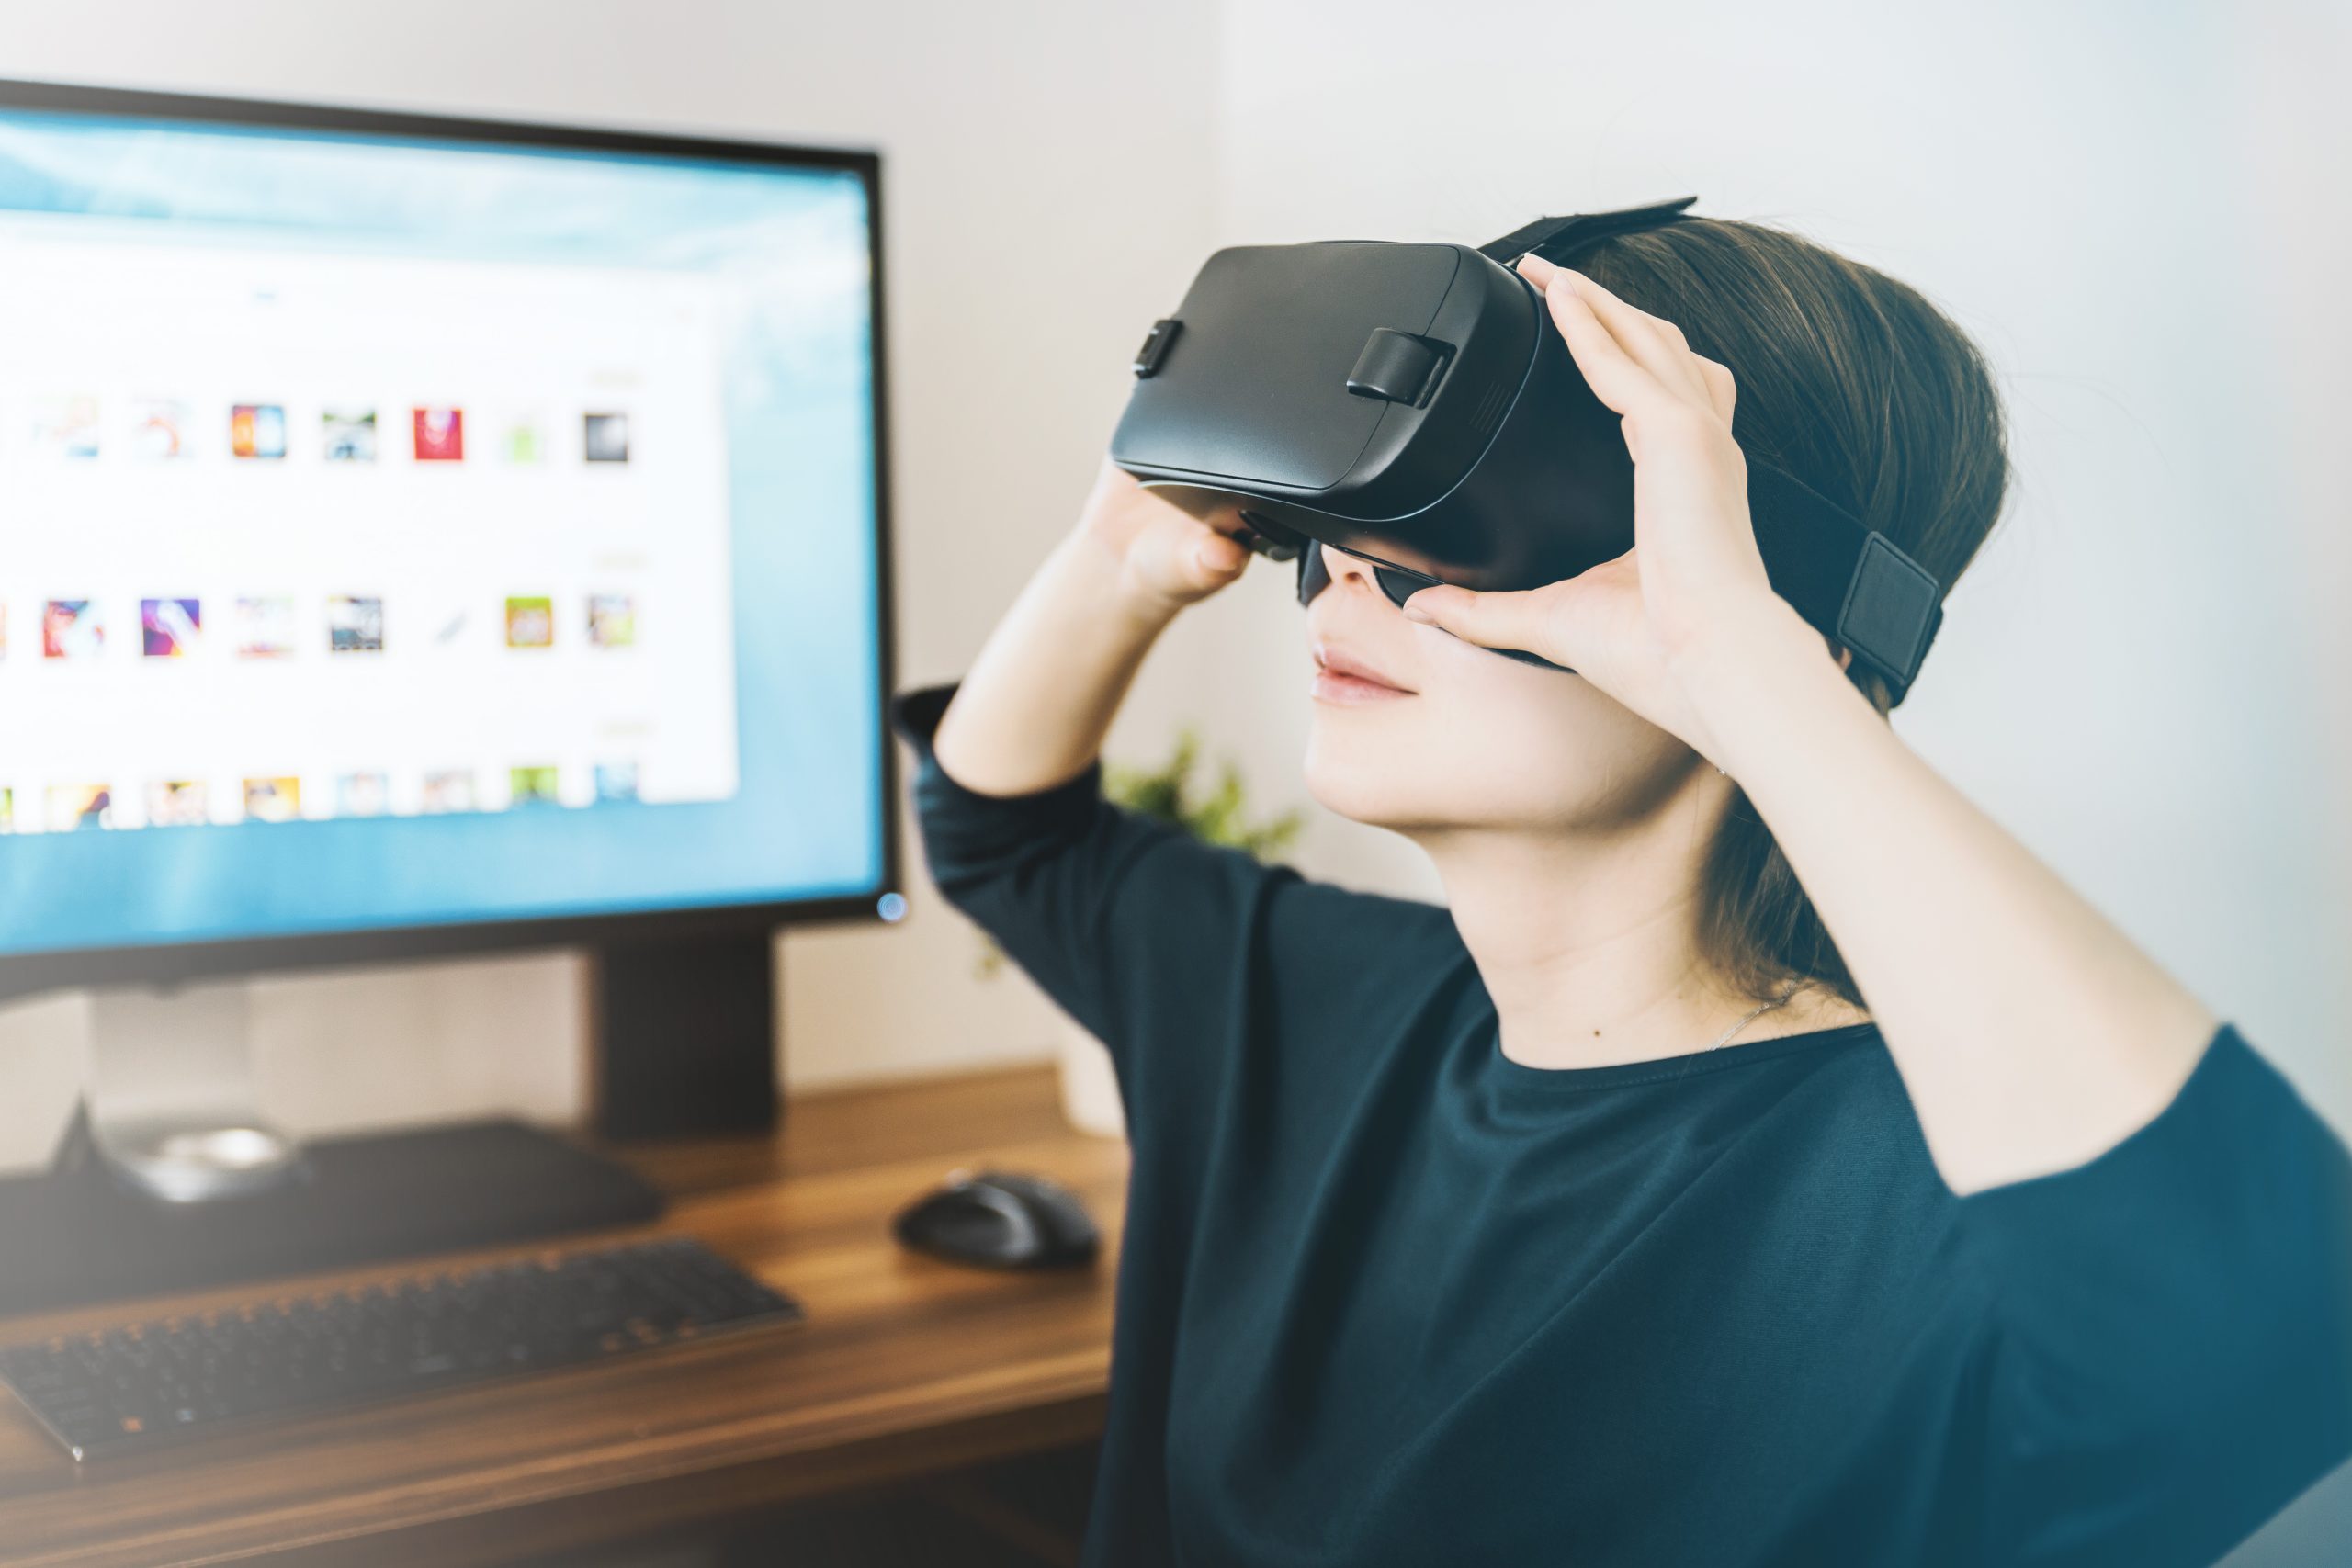 Pornography is First Boom in Virtual Reality